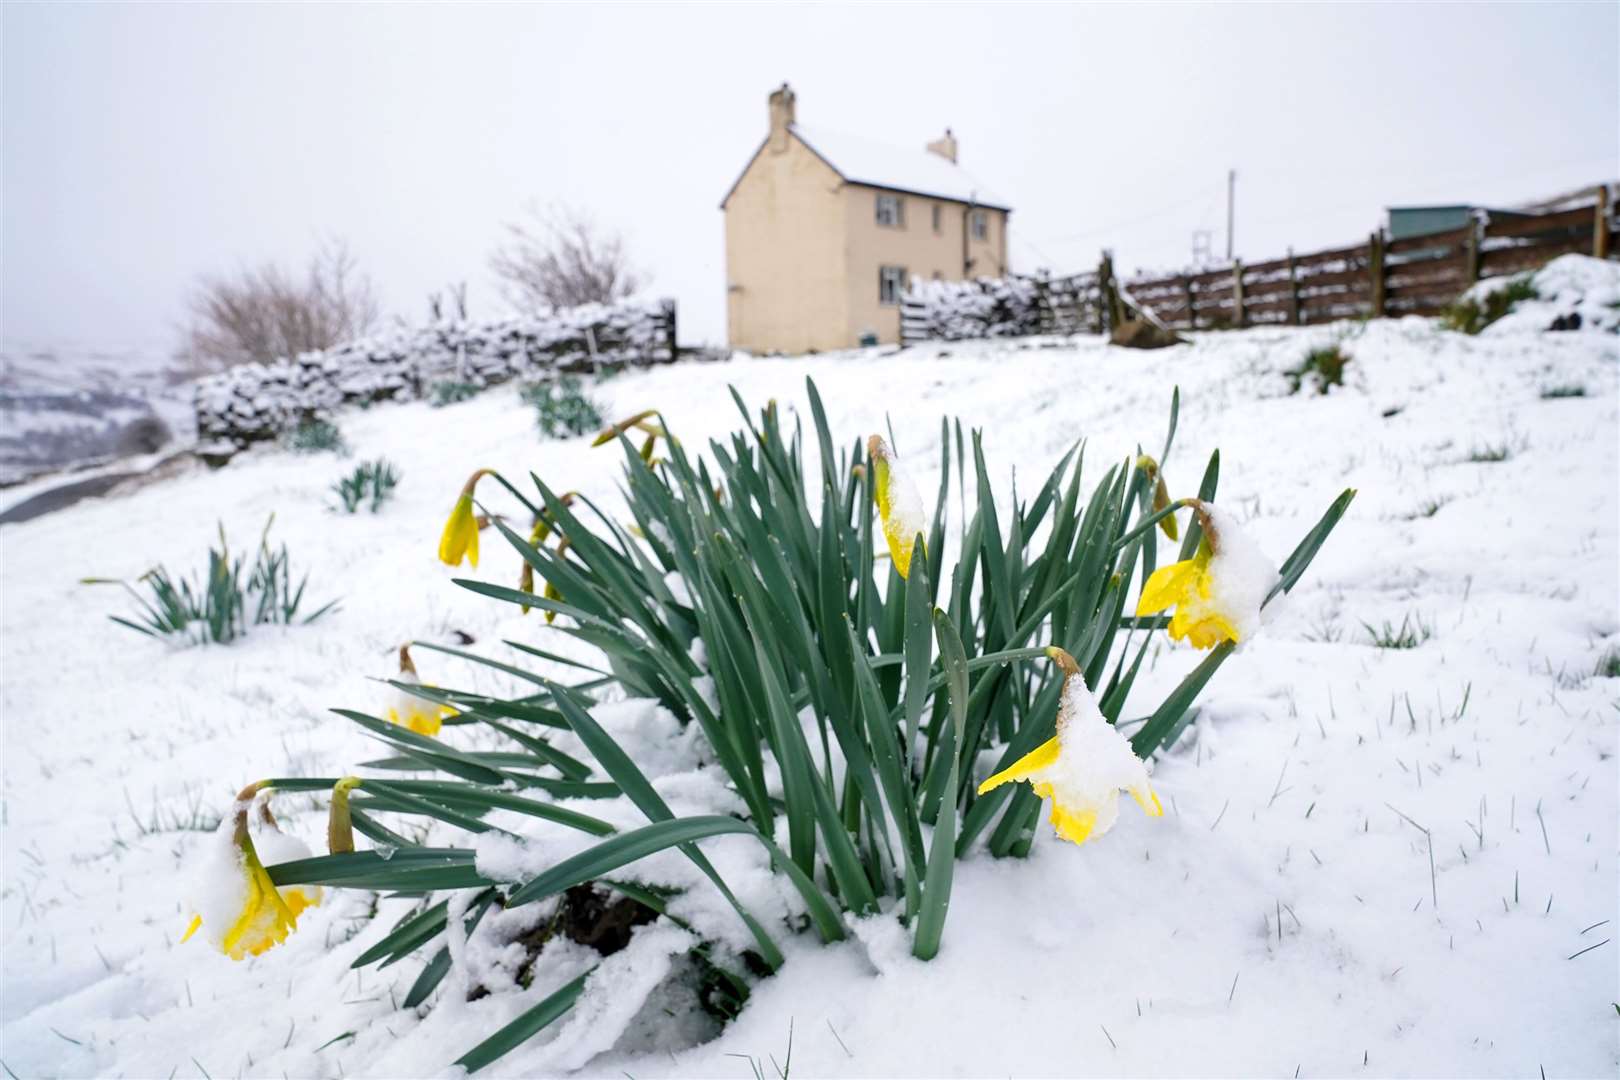 Daffodil blooms in the snow near Stanhope, in Northumberland (Owen Humphreys/PA)